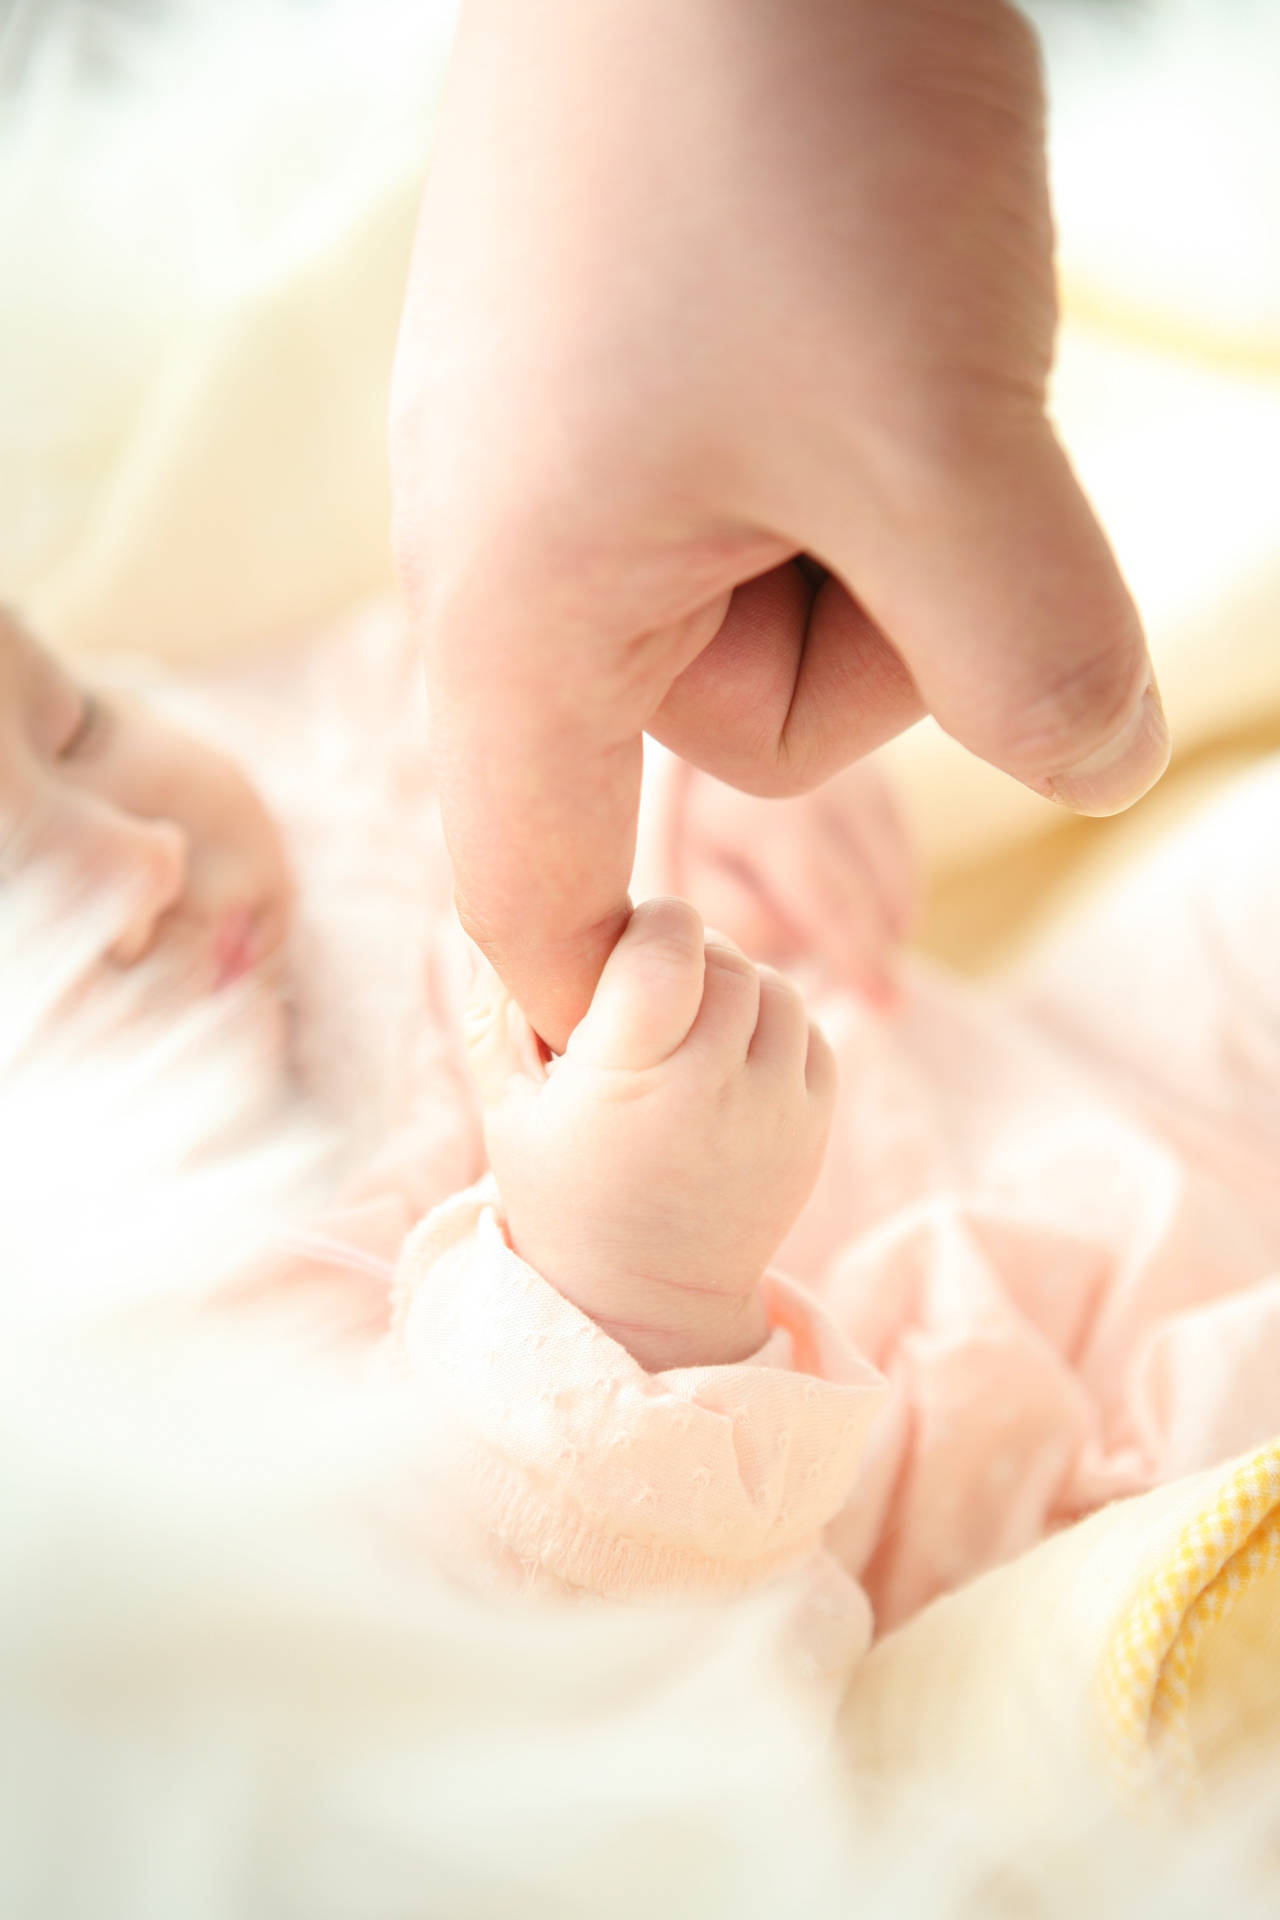 Cute Baby Grasping An Adult Finger